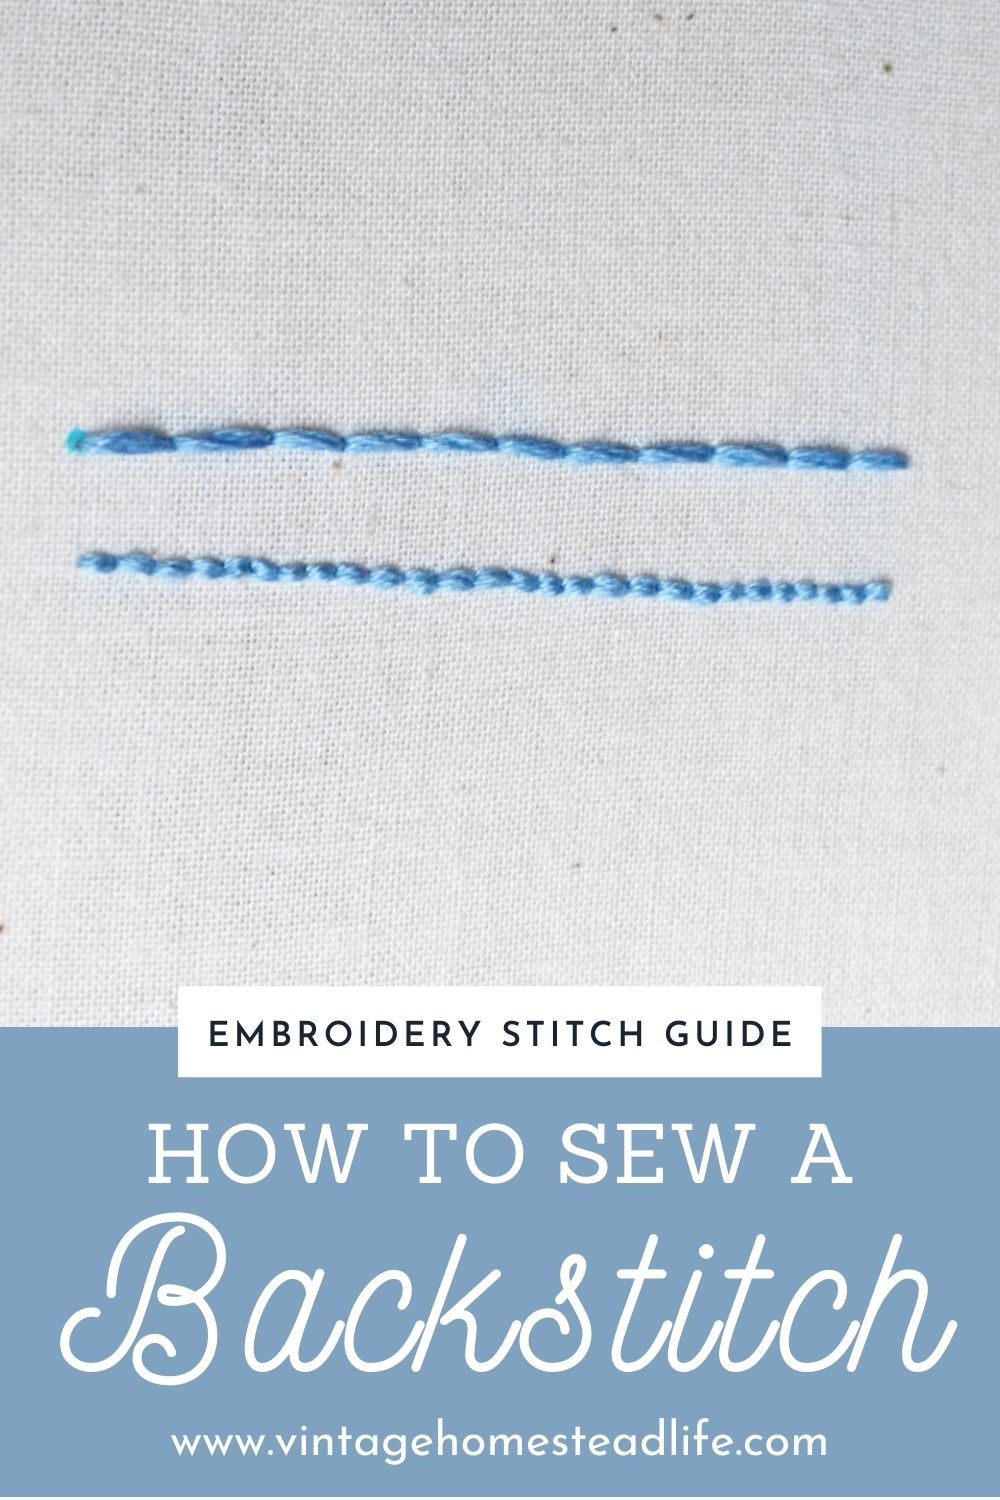 Learning a backstitch will allow you to complete nearly any embroidery project. Learning this stitch will really take you places in your embroidery adventures! 